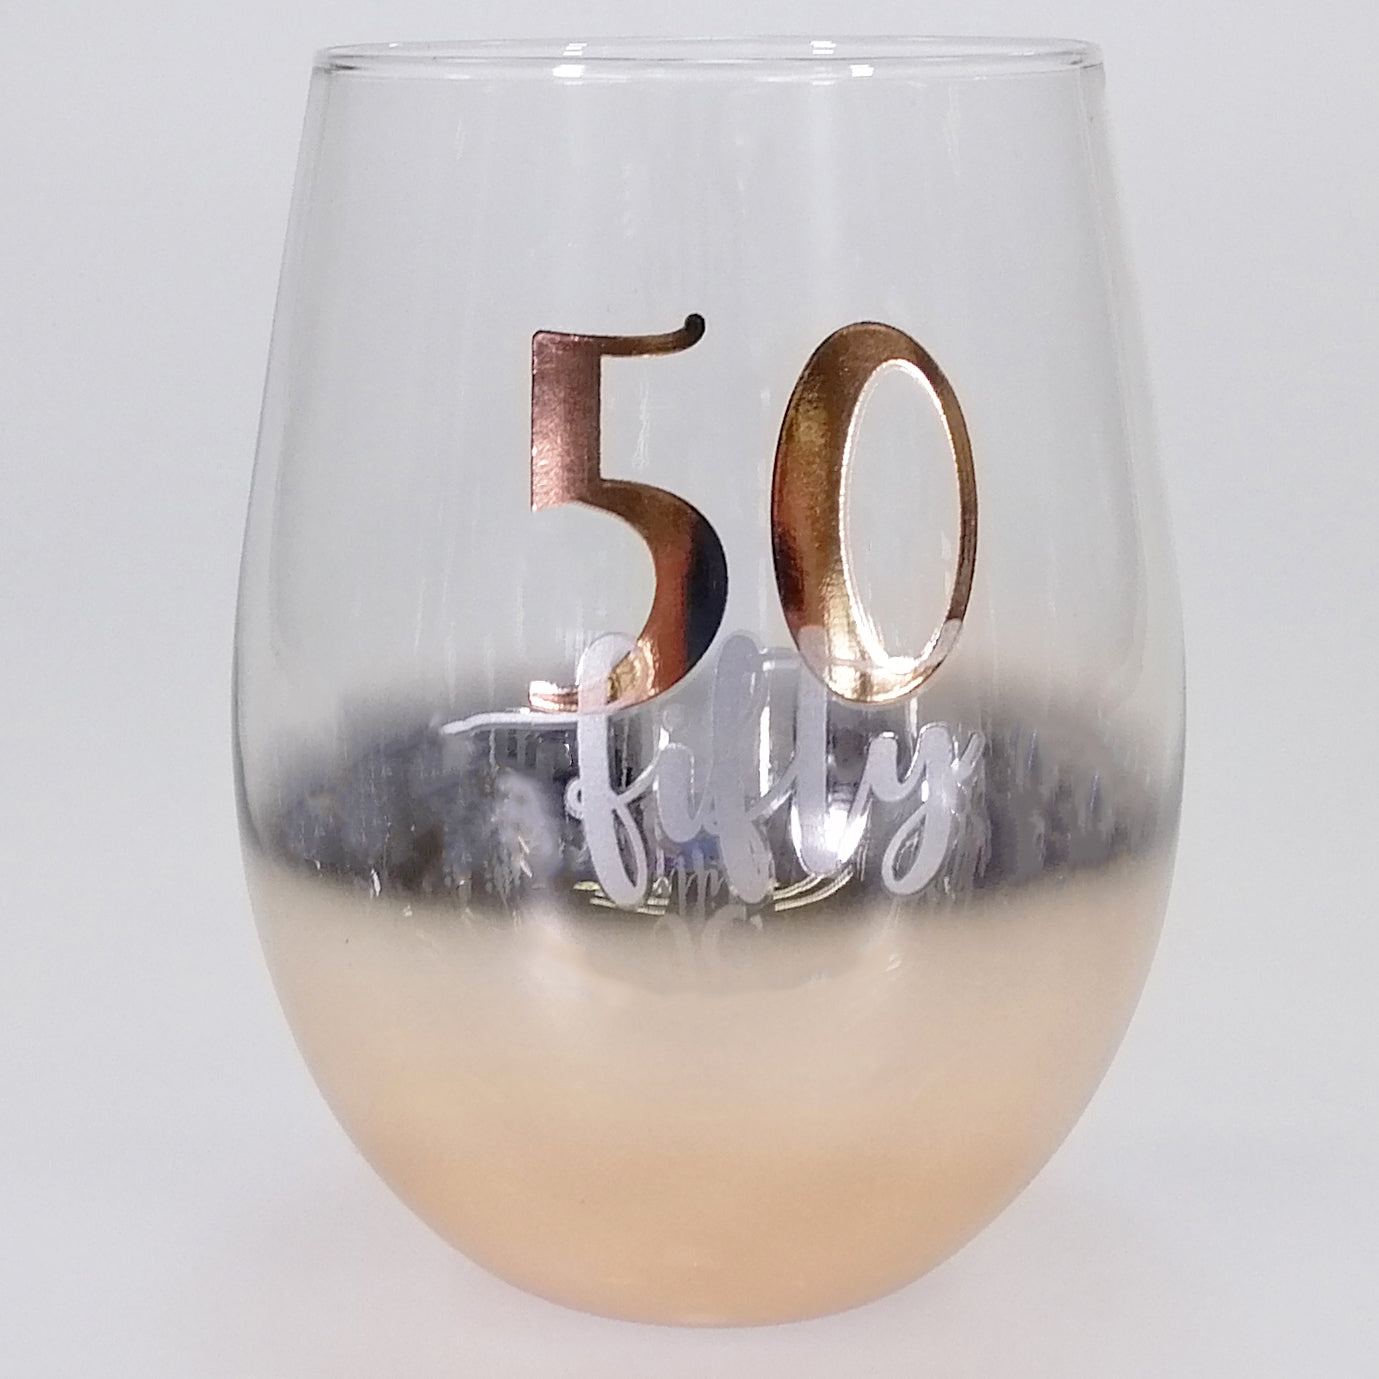 50th Gold Ombre Stemless Wine Glass